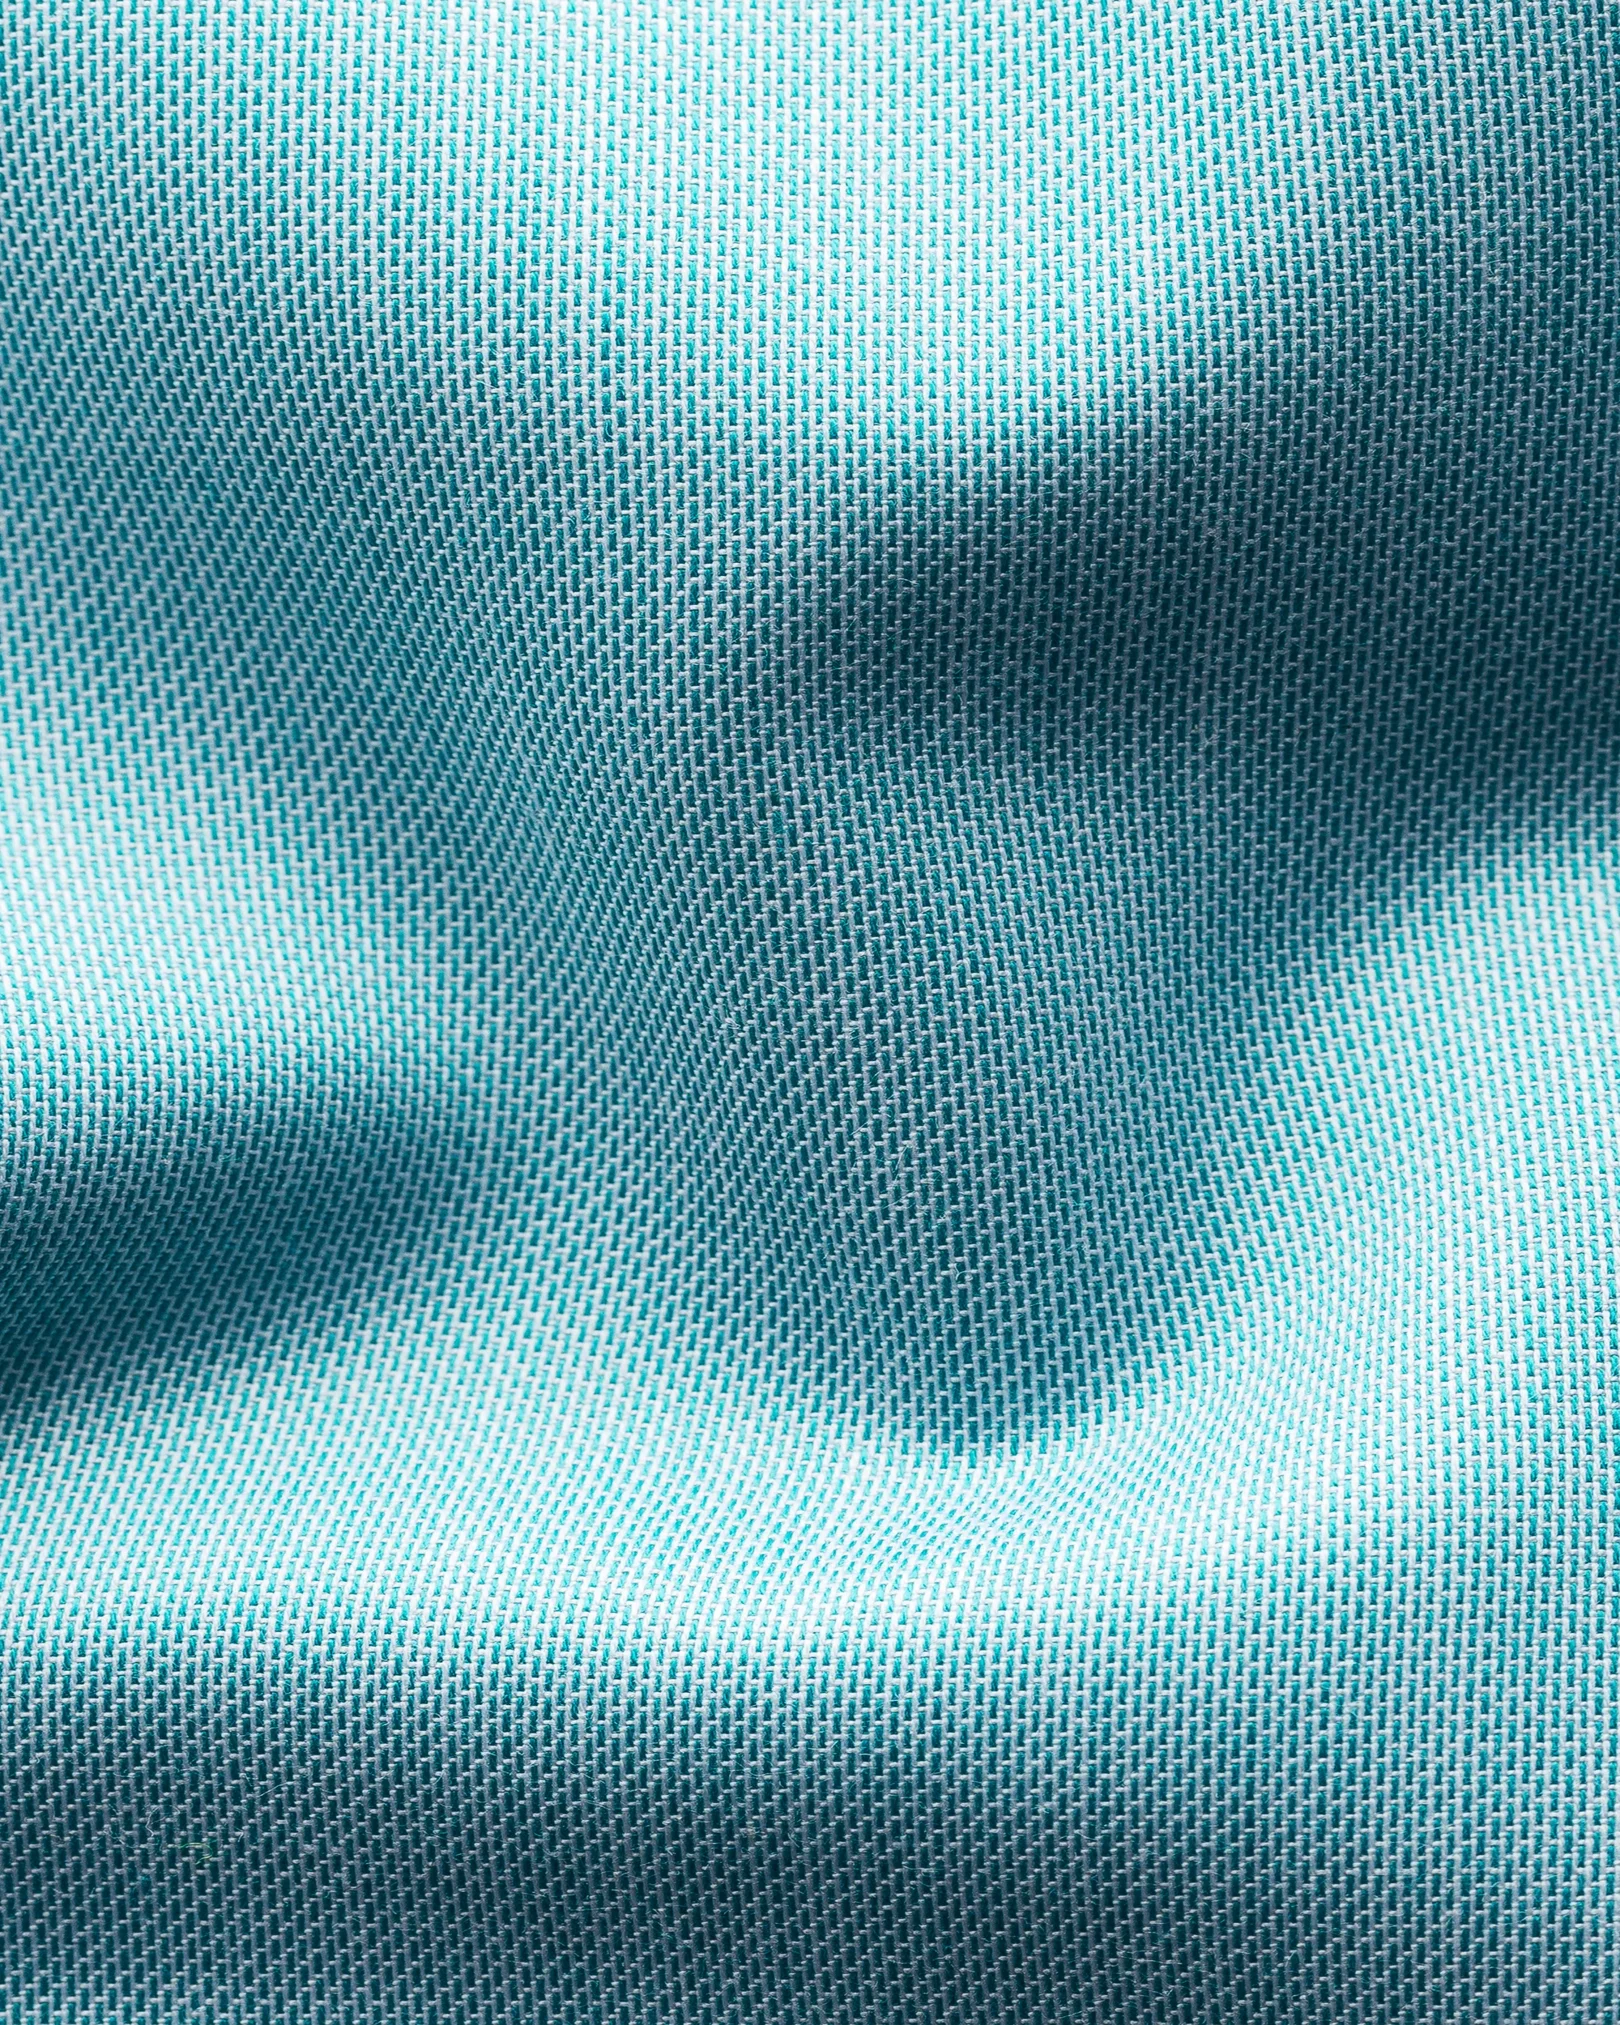 Eton - turquoise twill shirt navy piping pointed